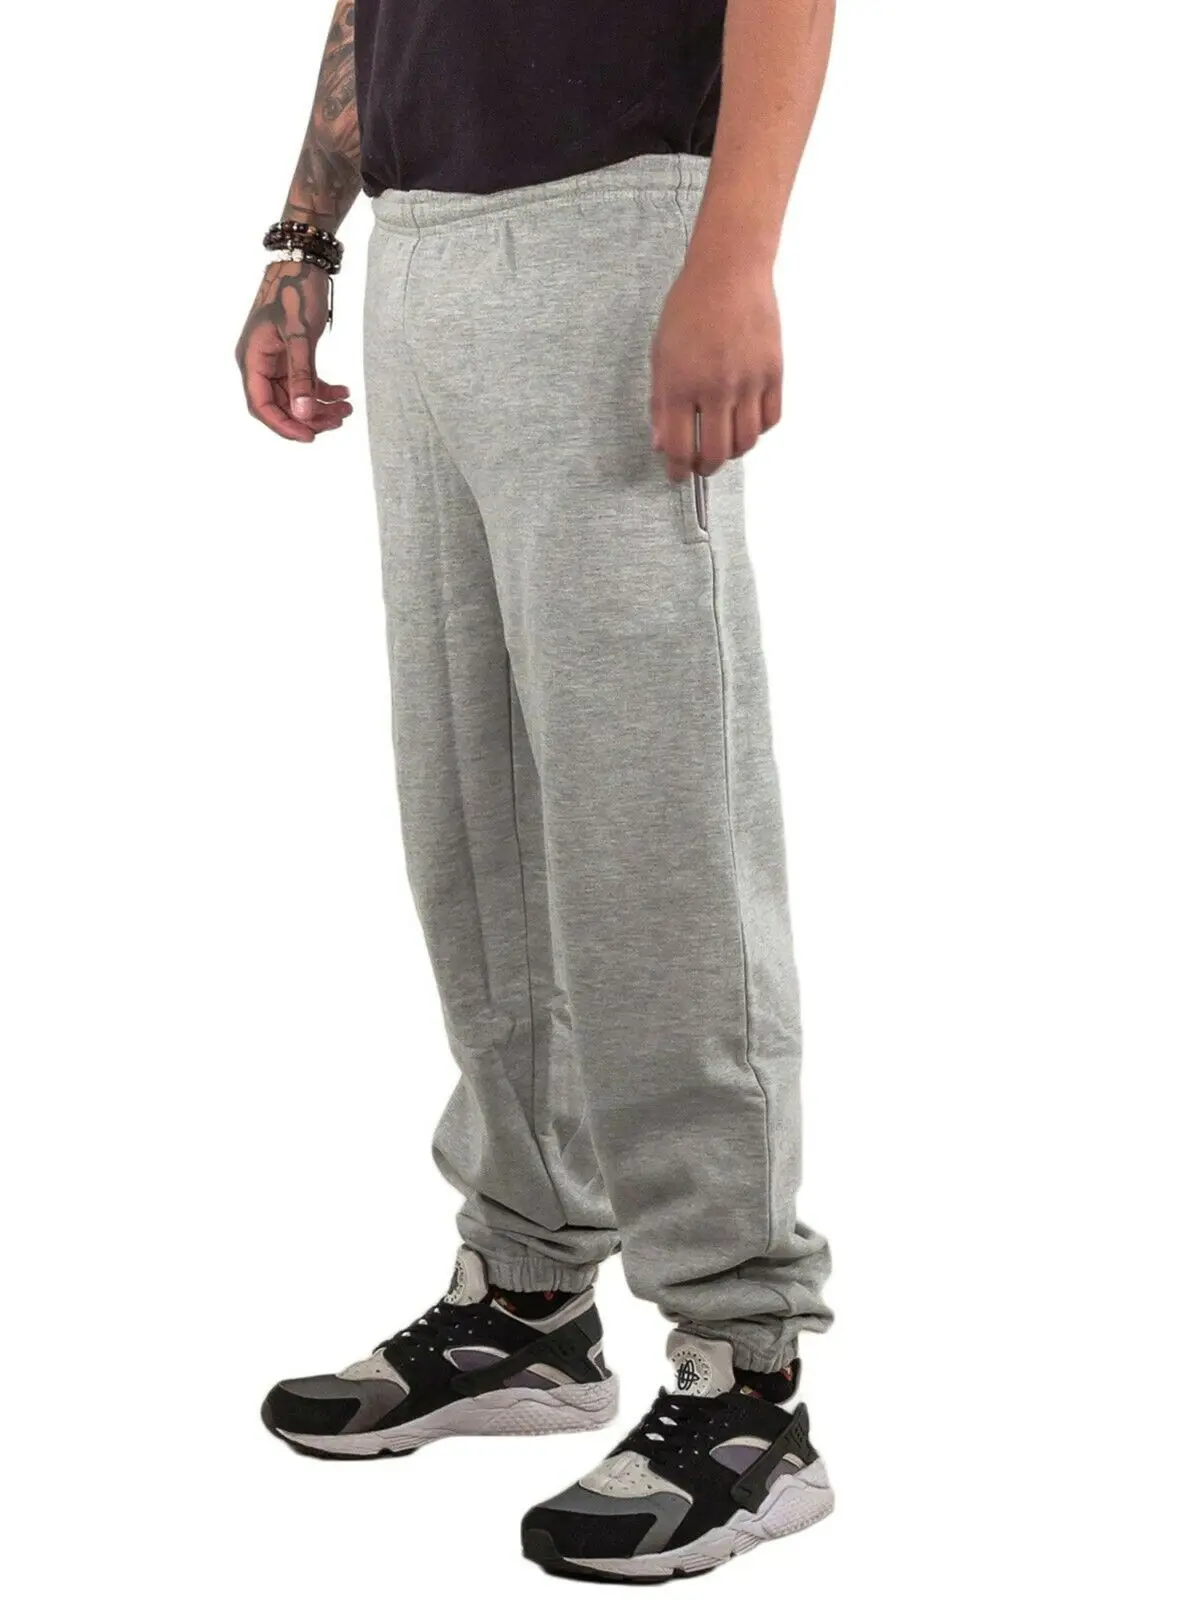 Pockets Thick Jogging Elasticated Bottoms Track Pants Casual Mens ...